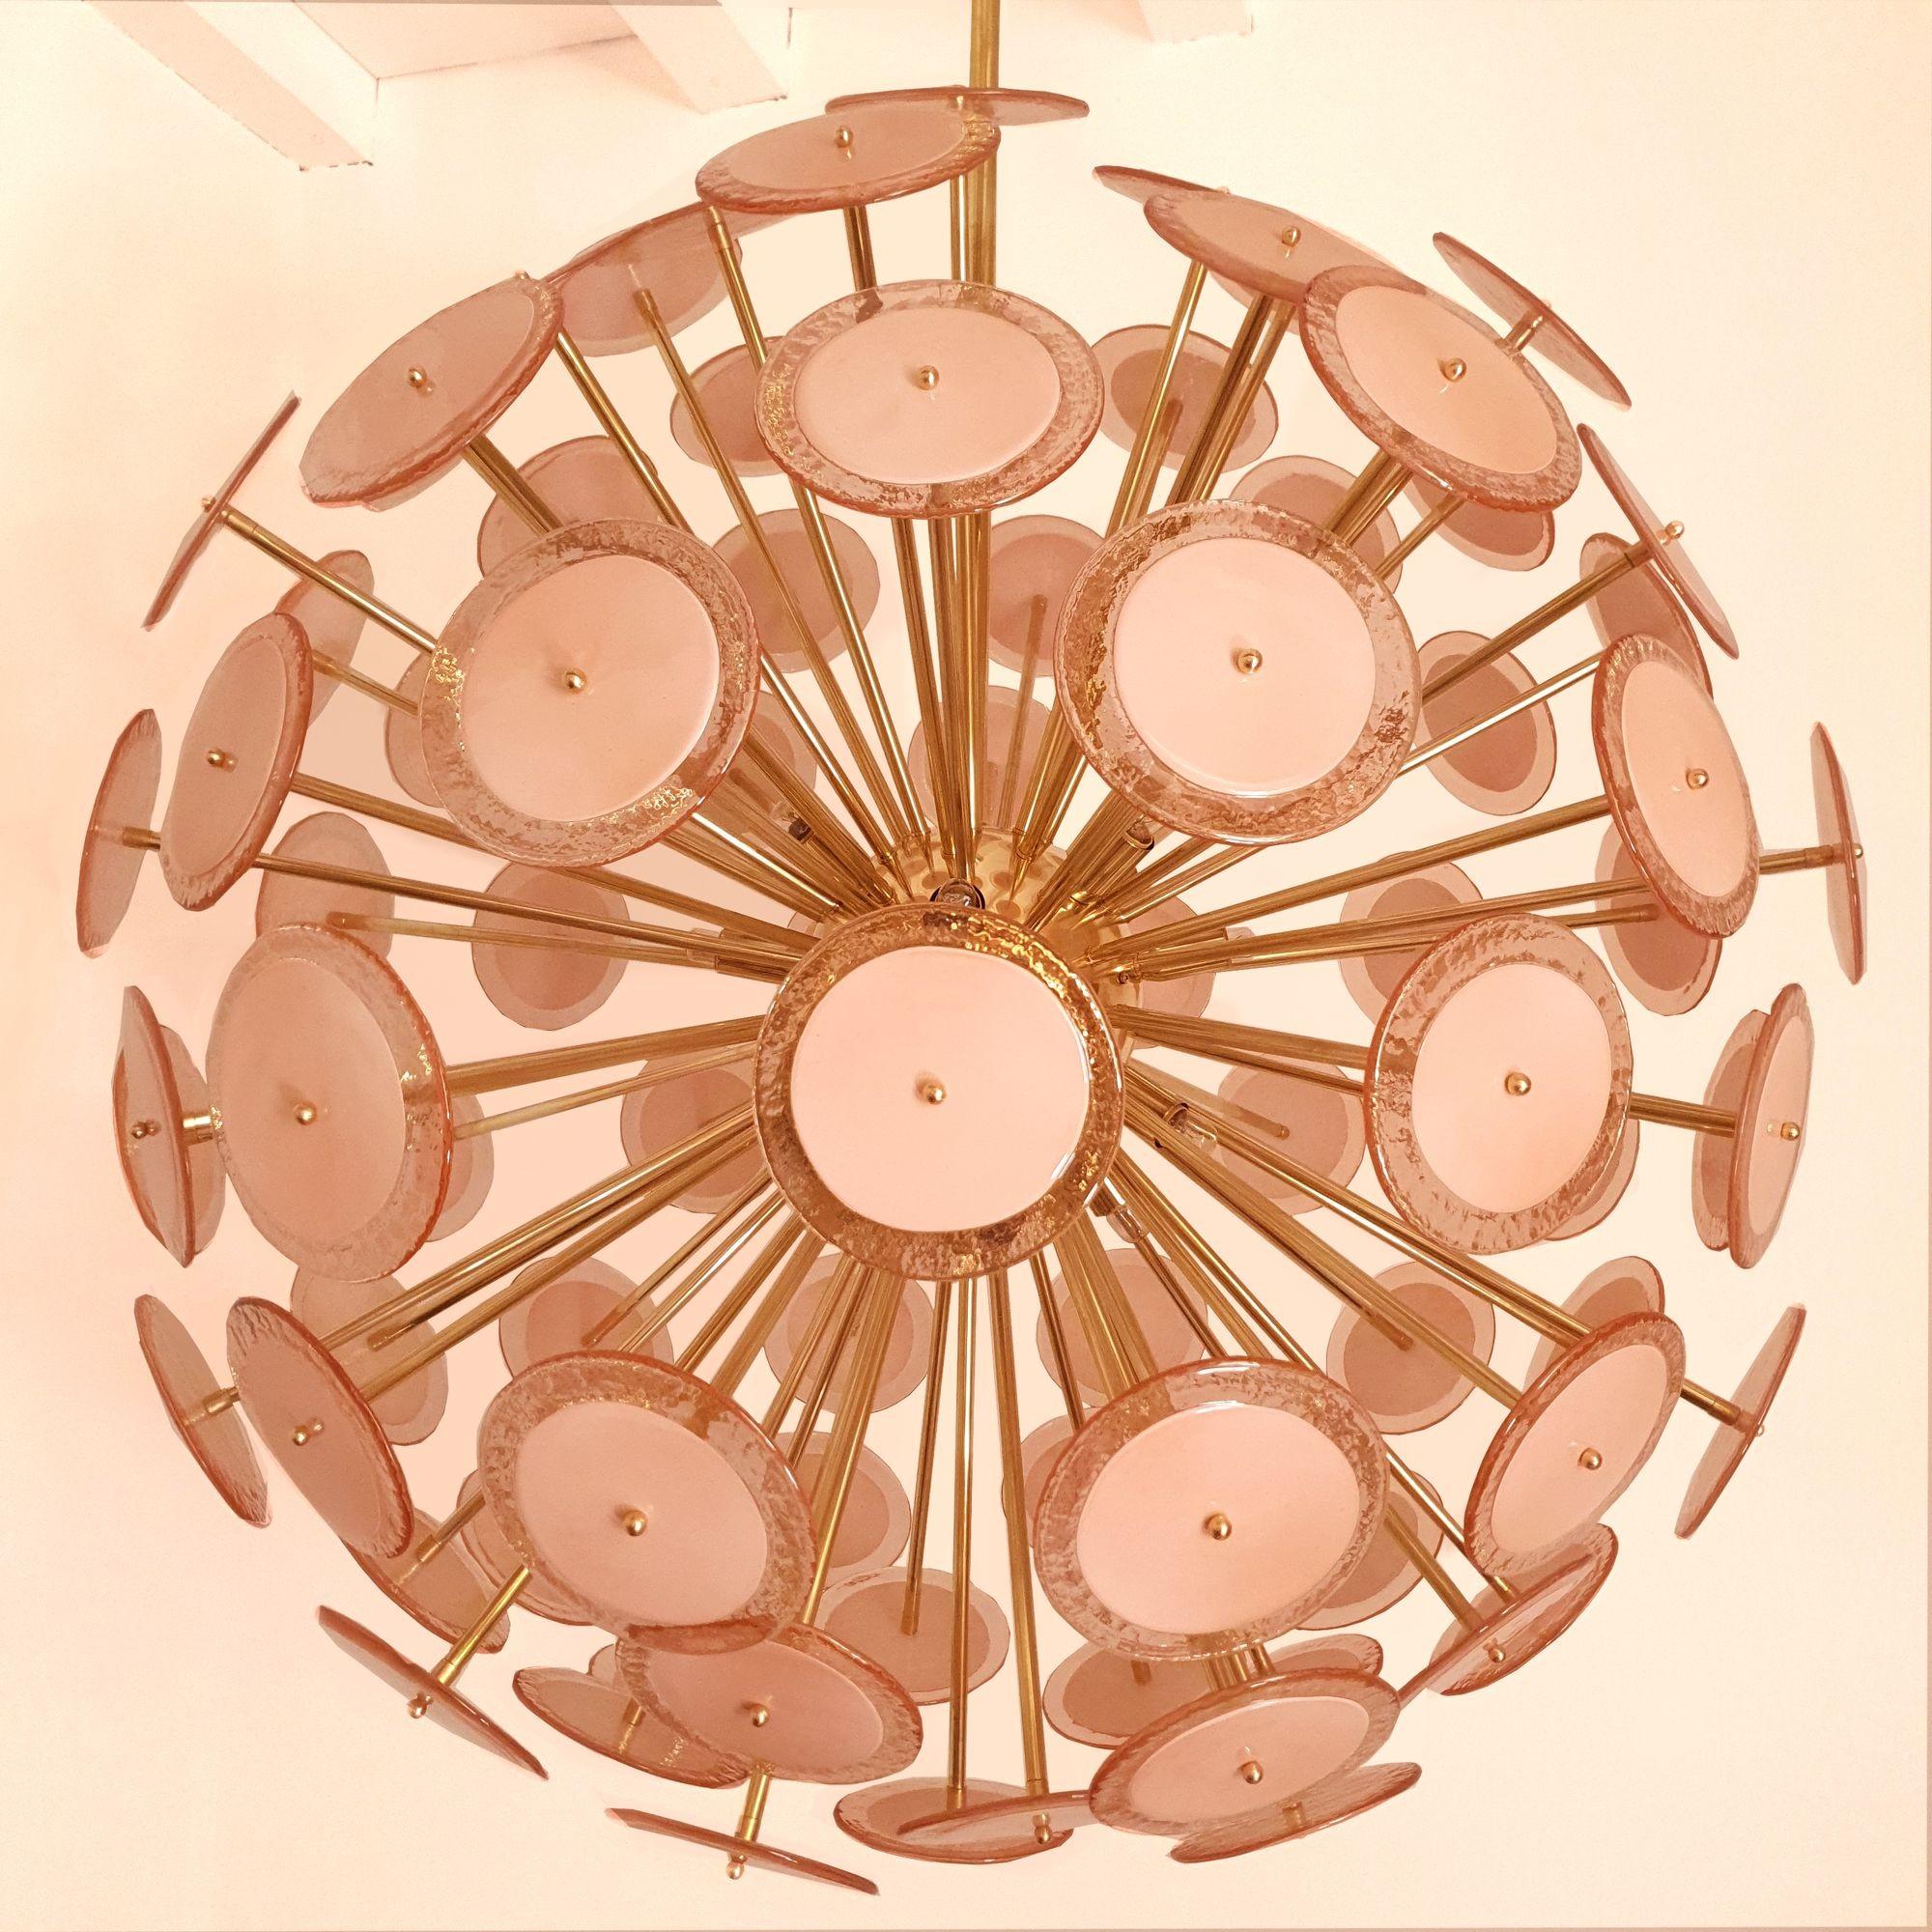 Mid Century Modern huge Sputnik chandelier, attributed to Vistosi Italy 1980s.
The large chandelier is made of pink Murano glass discs, on a brass round frame.
The Murano glass discs are in a transparent Ballerina Pink on the border and an opaque